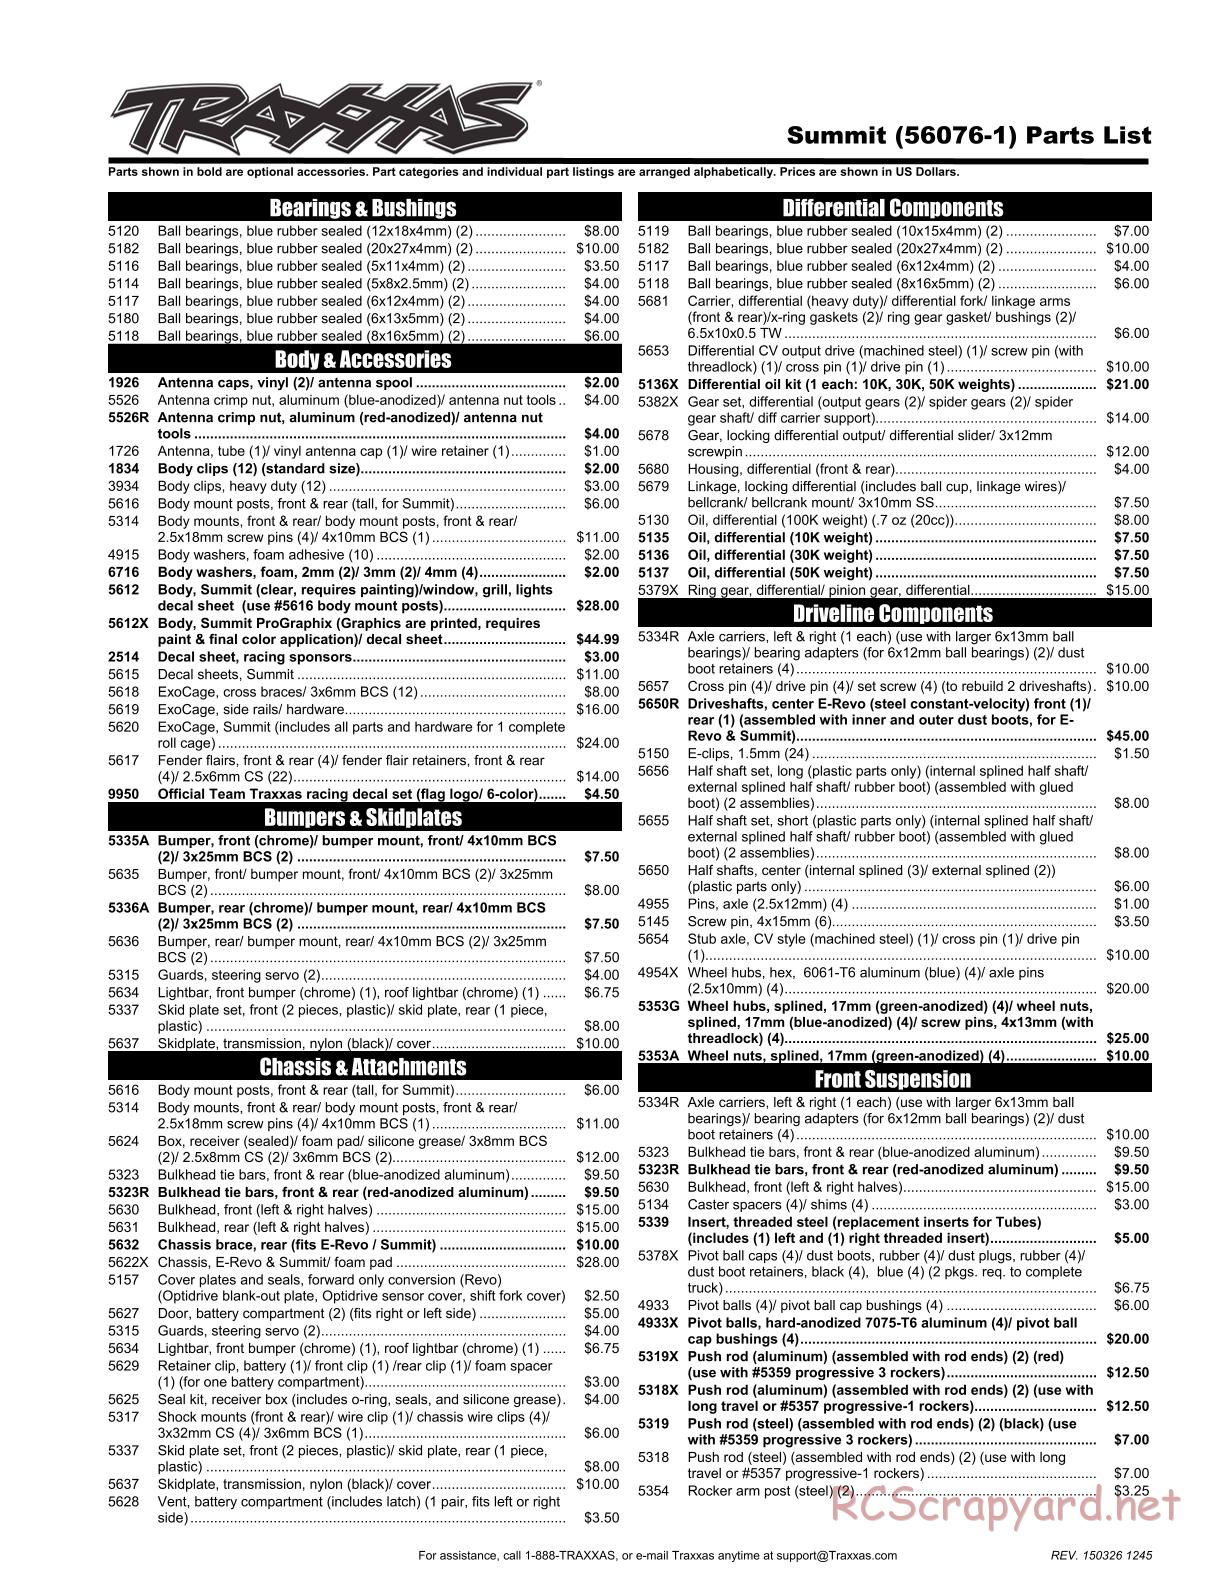 Traxxas - Summit (2015) - Parts List - Page 1